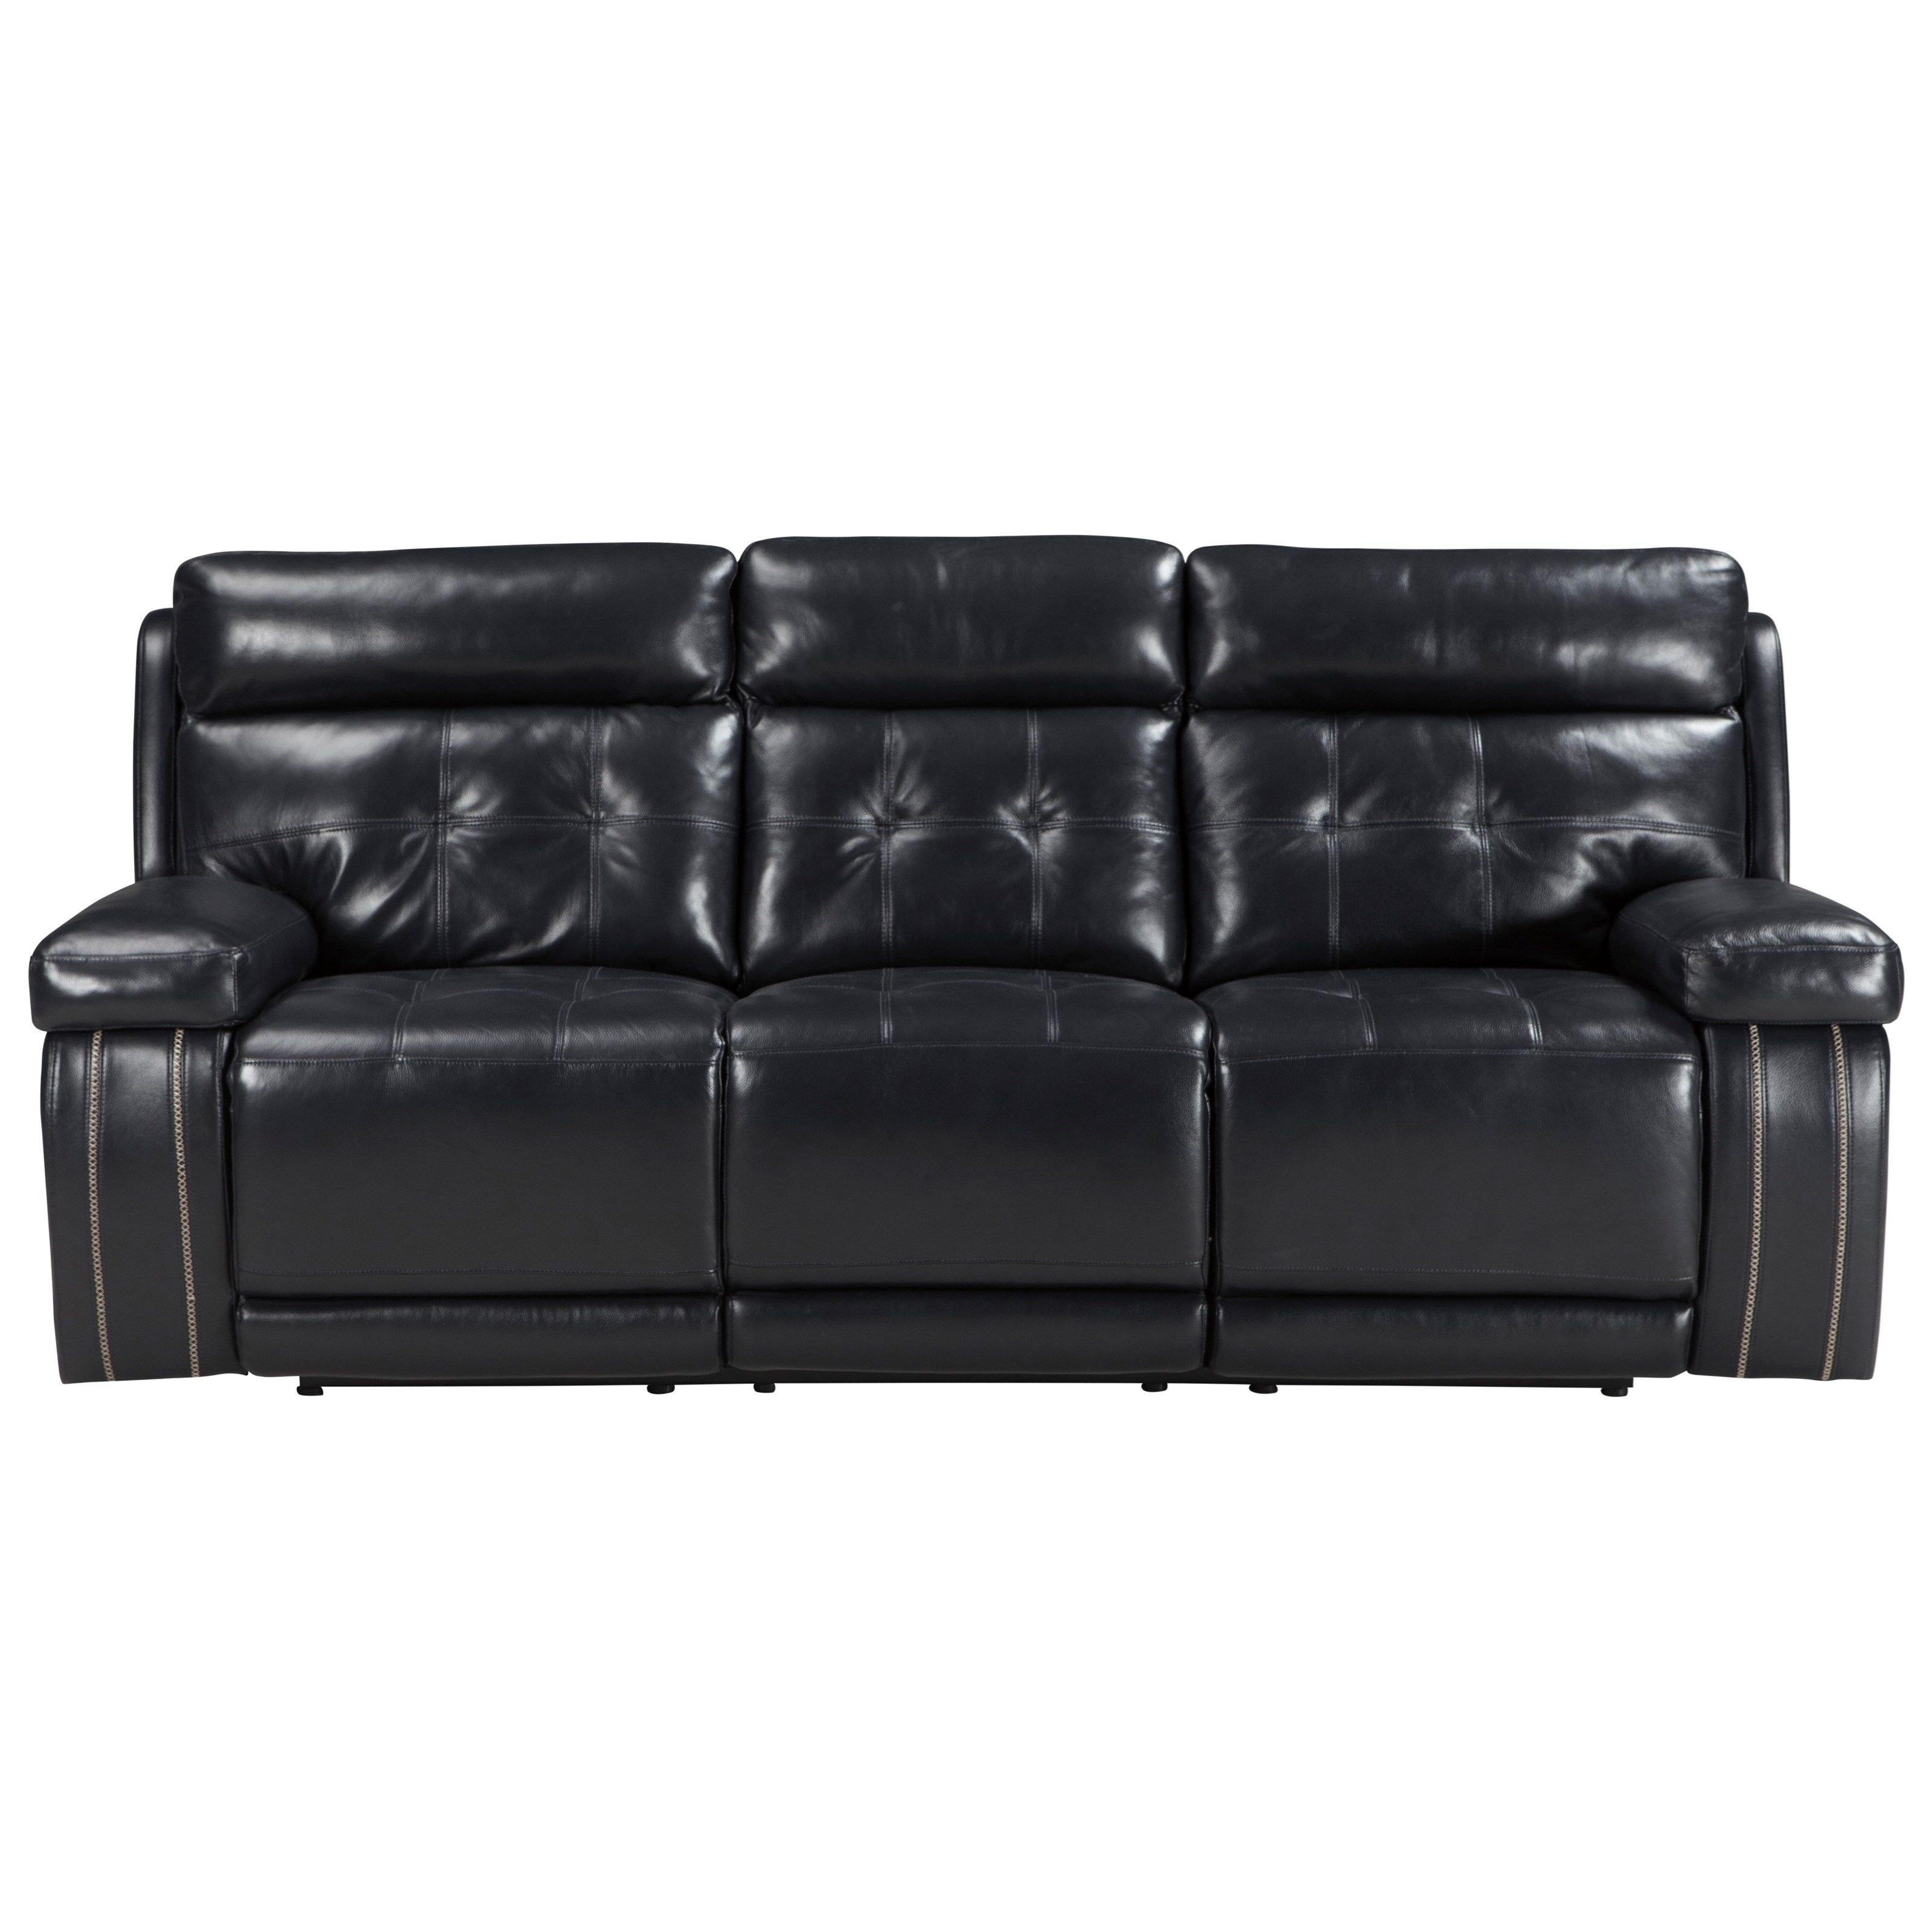 Signature Designashley Graford Leather Match Power Reclining Throughout Denali Charcoal Grey 6 Piece Reclining Sectionals With 2 Power Headrests (View 16 of 30)